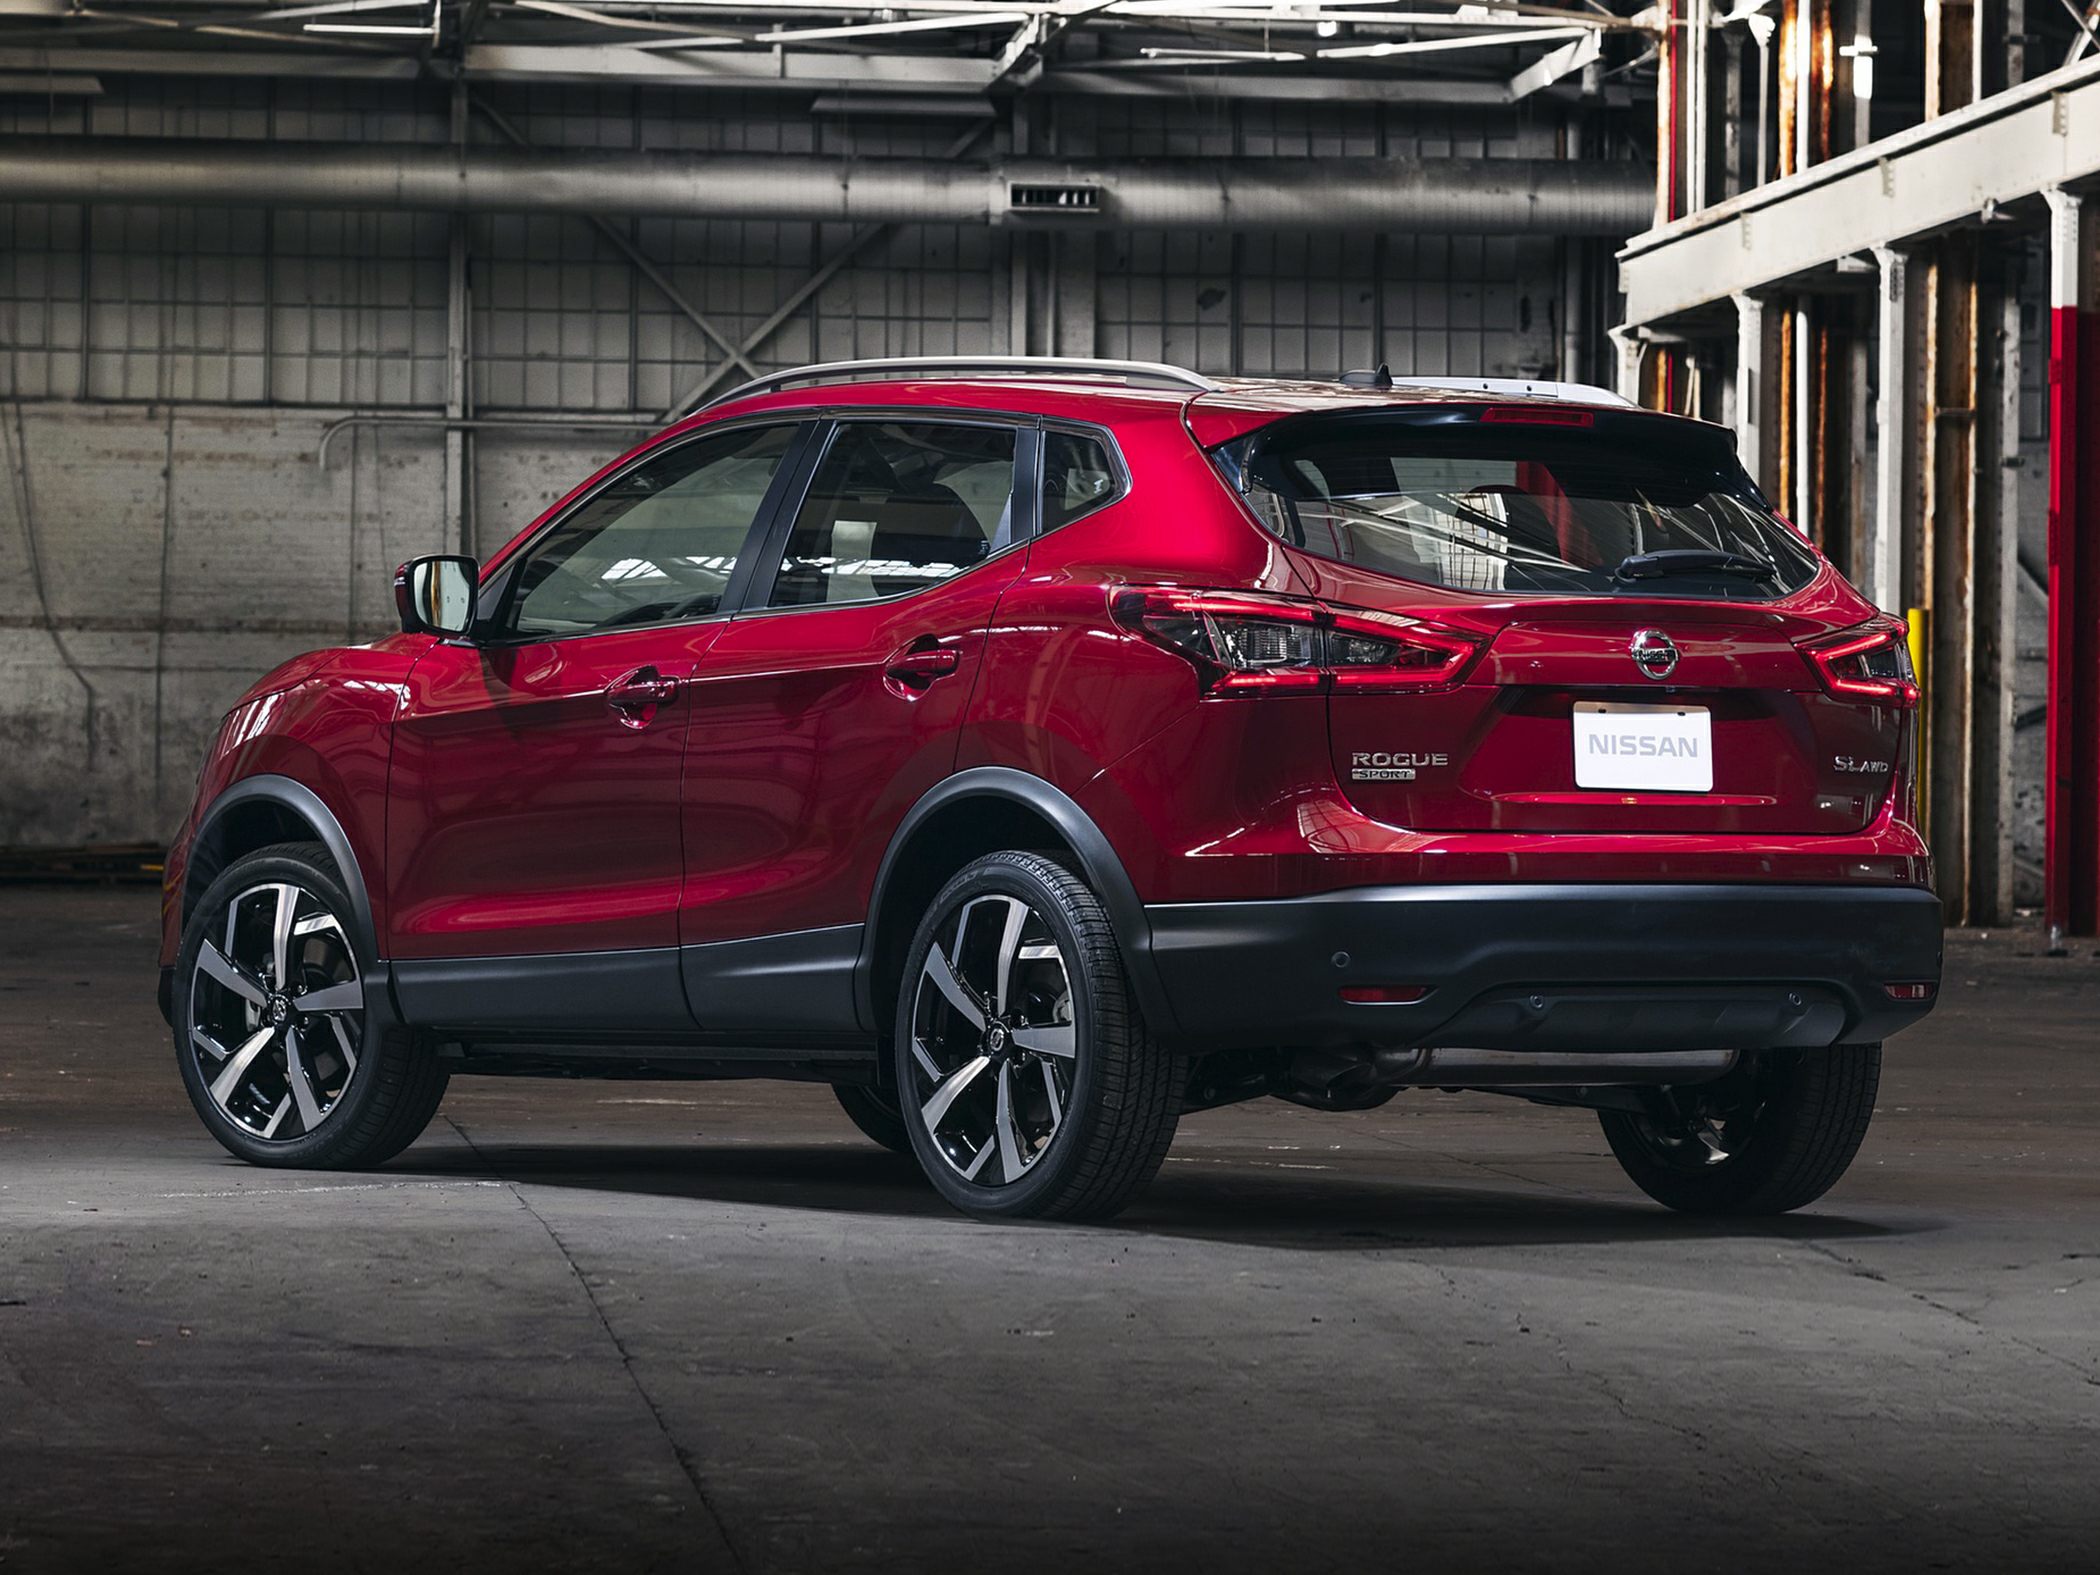 2020 Nissan Rogue Sport Deals Prices Incentives Leases Overview 